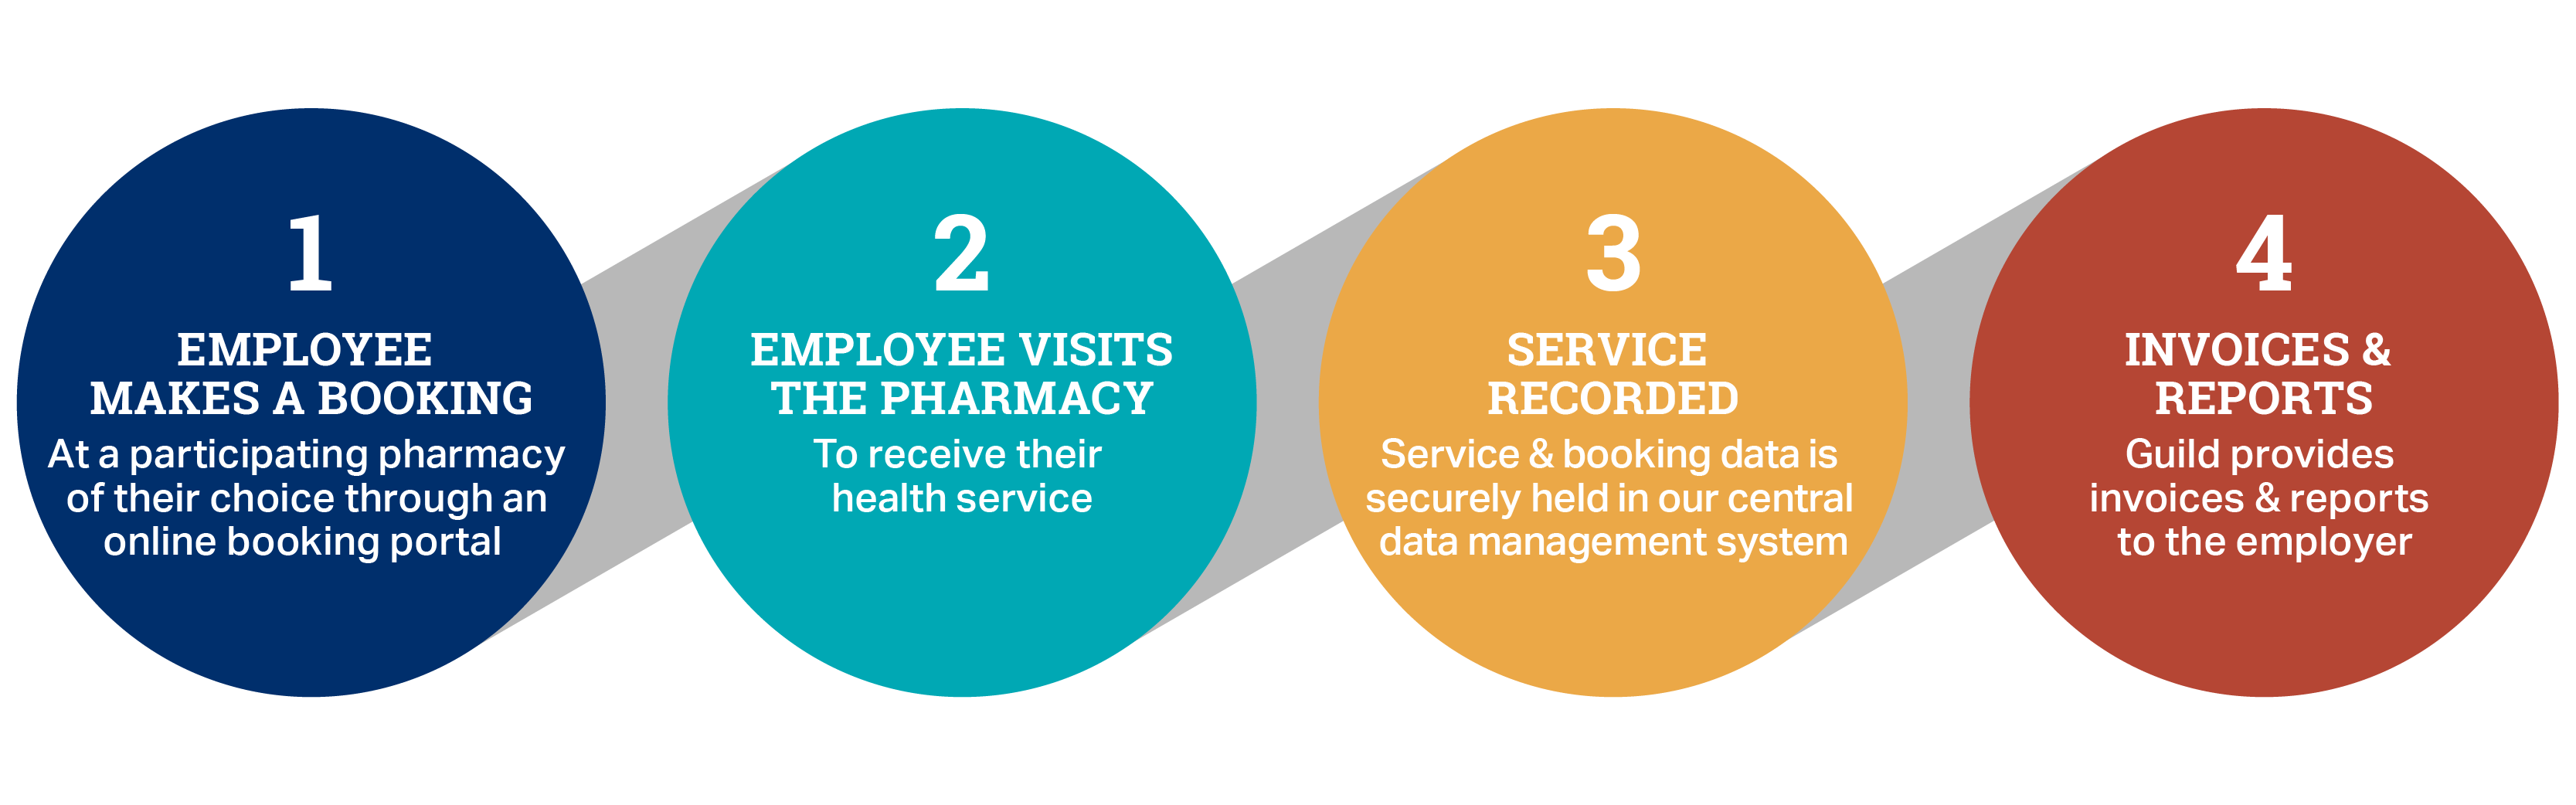 Step 1: Employee makes a booking. At a participating pharmacy of their choice through an online booking portal. Step 2: Employee visits the pharmacy. To receive their health service. Step 3: Service recorded. Service and booking data is securely held in our central data management system. Step 4: Invoice and reports. Guild provide invoices and reports to the employer.